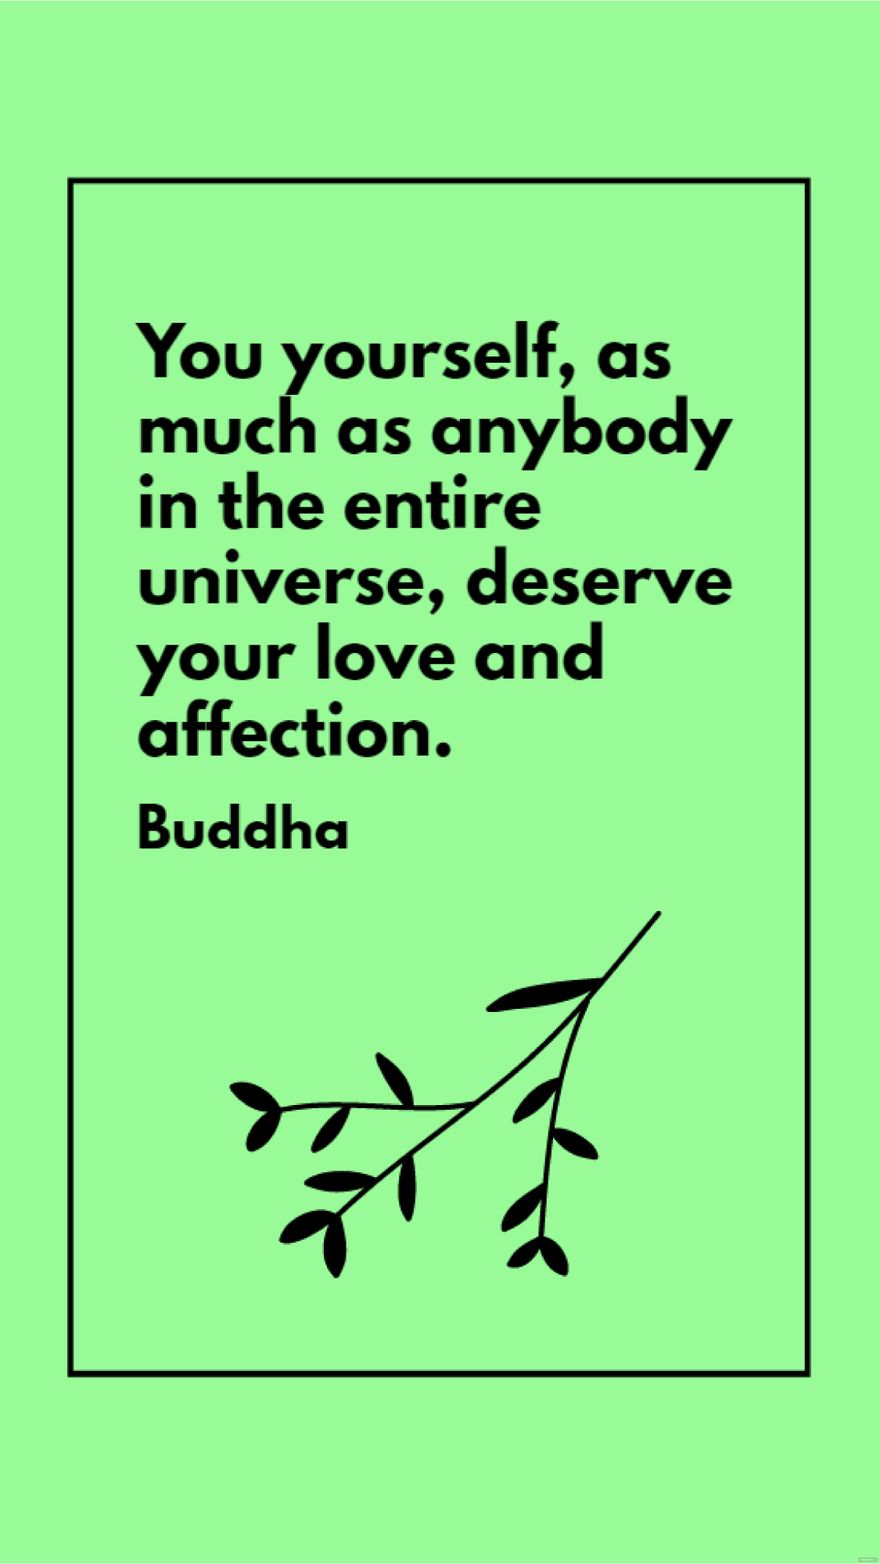 Free Buddha - You yourself, as much as anybody in the entire universe, deserve your love and affection.